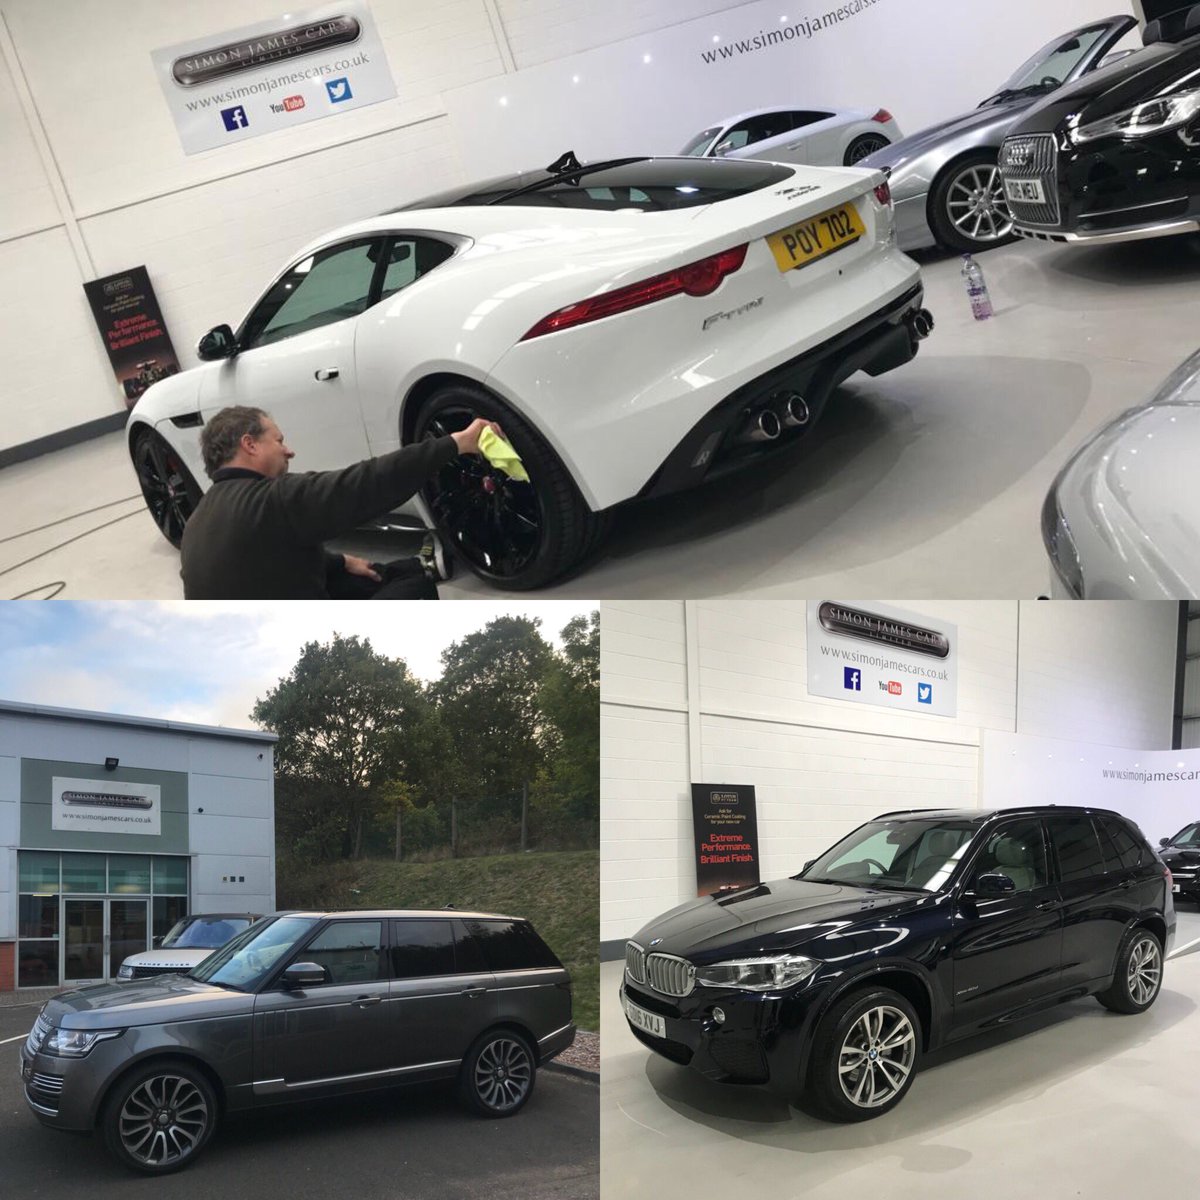 Morning final detail for today’s handovers
#newcarday for 3 excited clients 😁
#jaguar #ftype #supercharged 
#rangerover #voguese 
#bmw #bmwx5
#sold #carsforsale #carshowroom #carlifestyle #jaguarftyper #rangerovervogue #msport #simonjamescars #chesterfield #derbyshire 🇬🇧